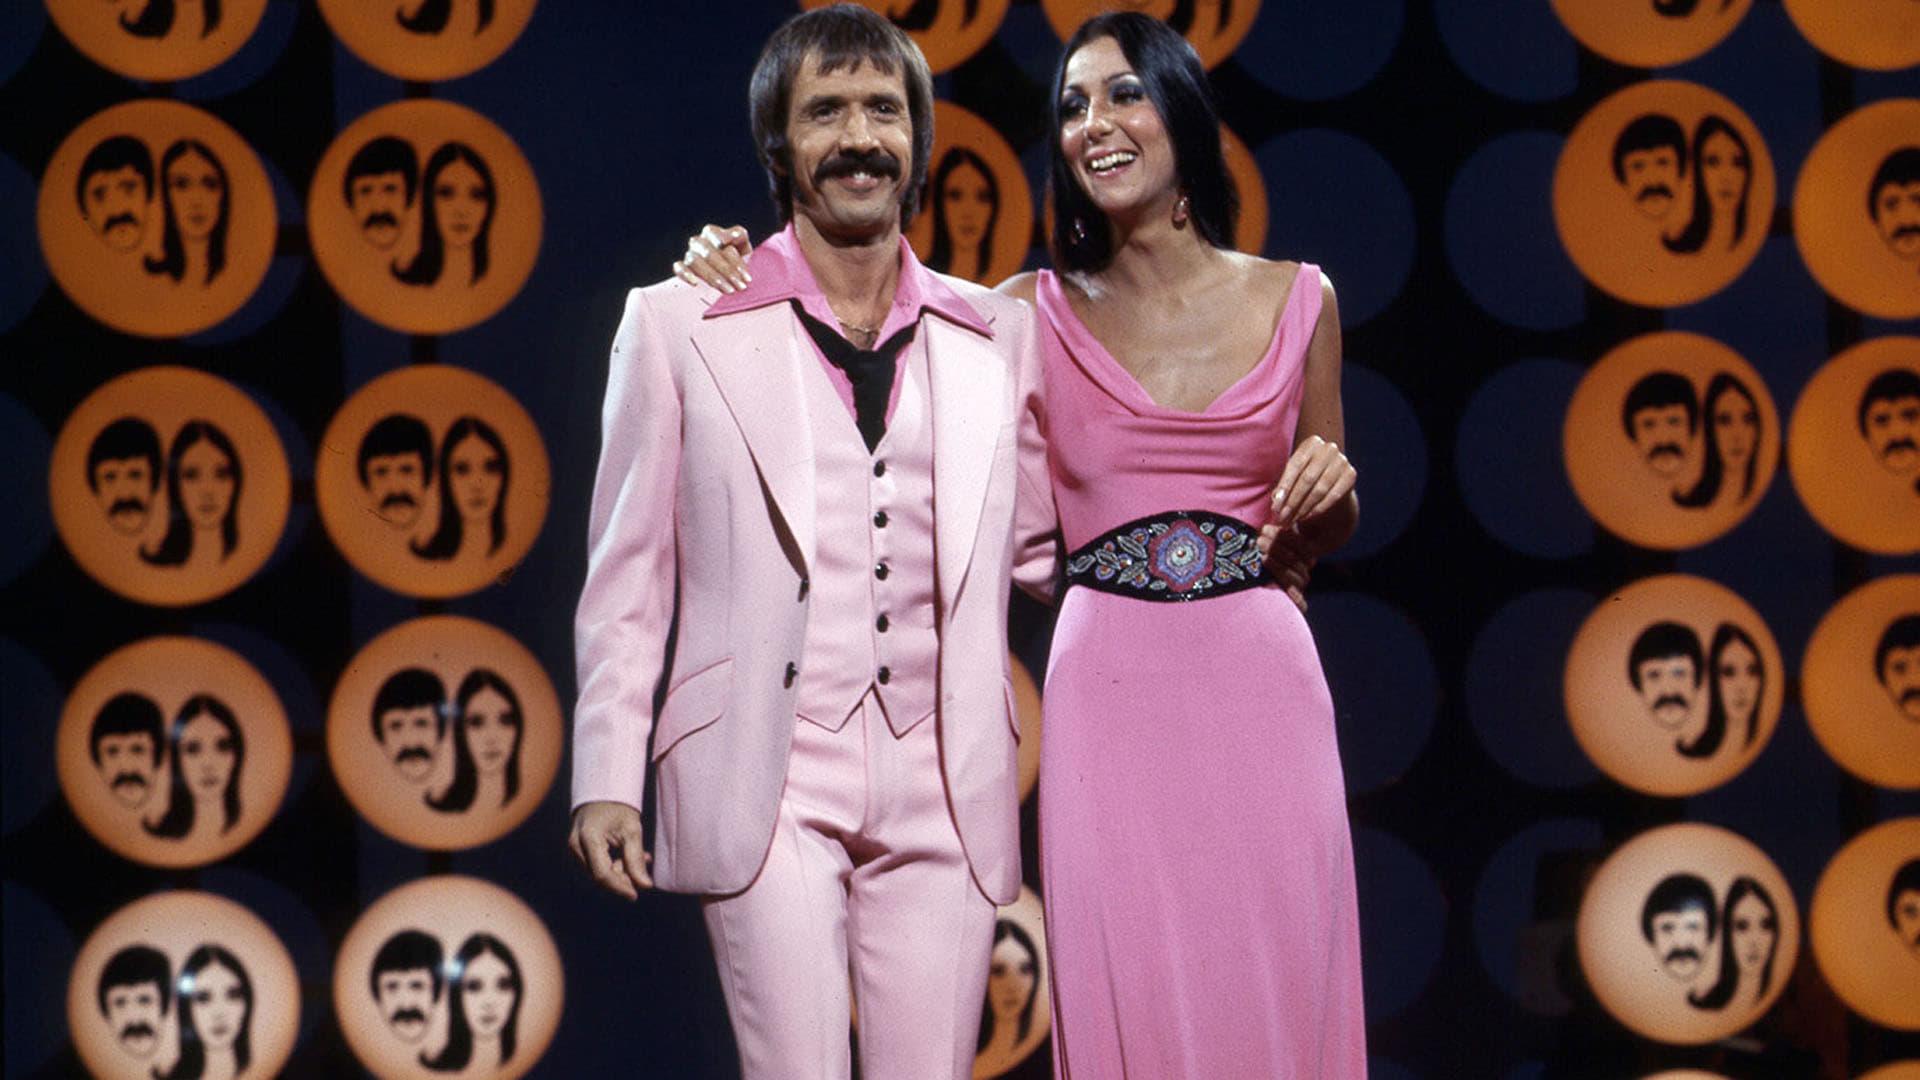 The Sonny & Cher Show backdrop